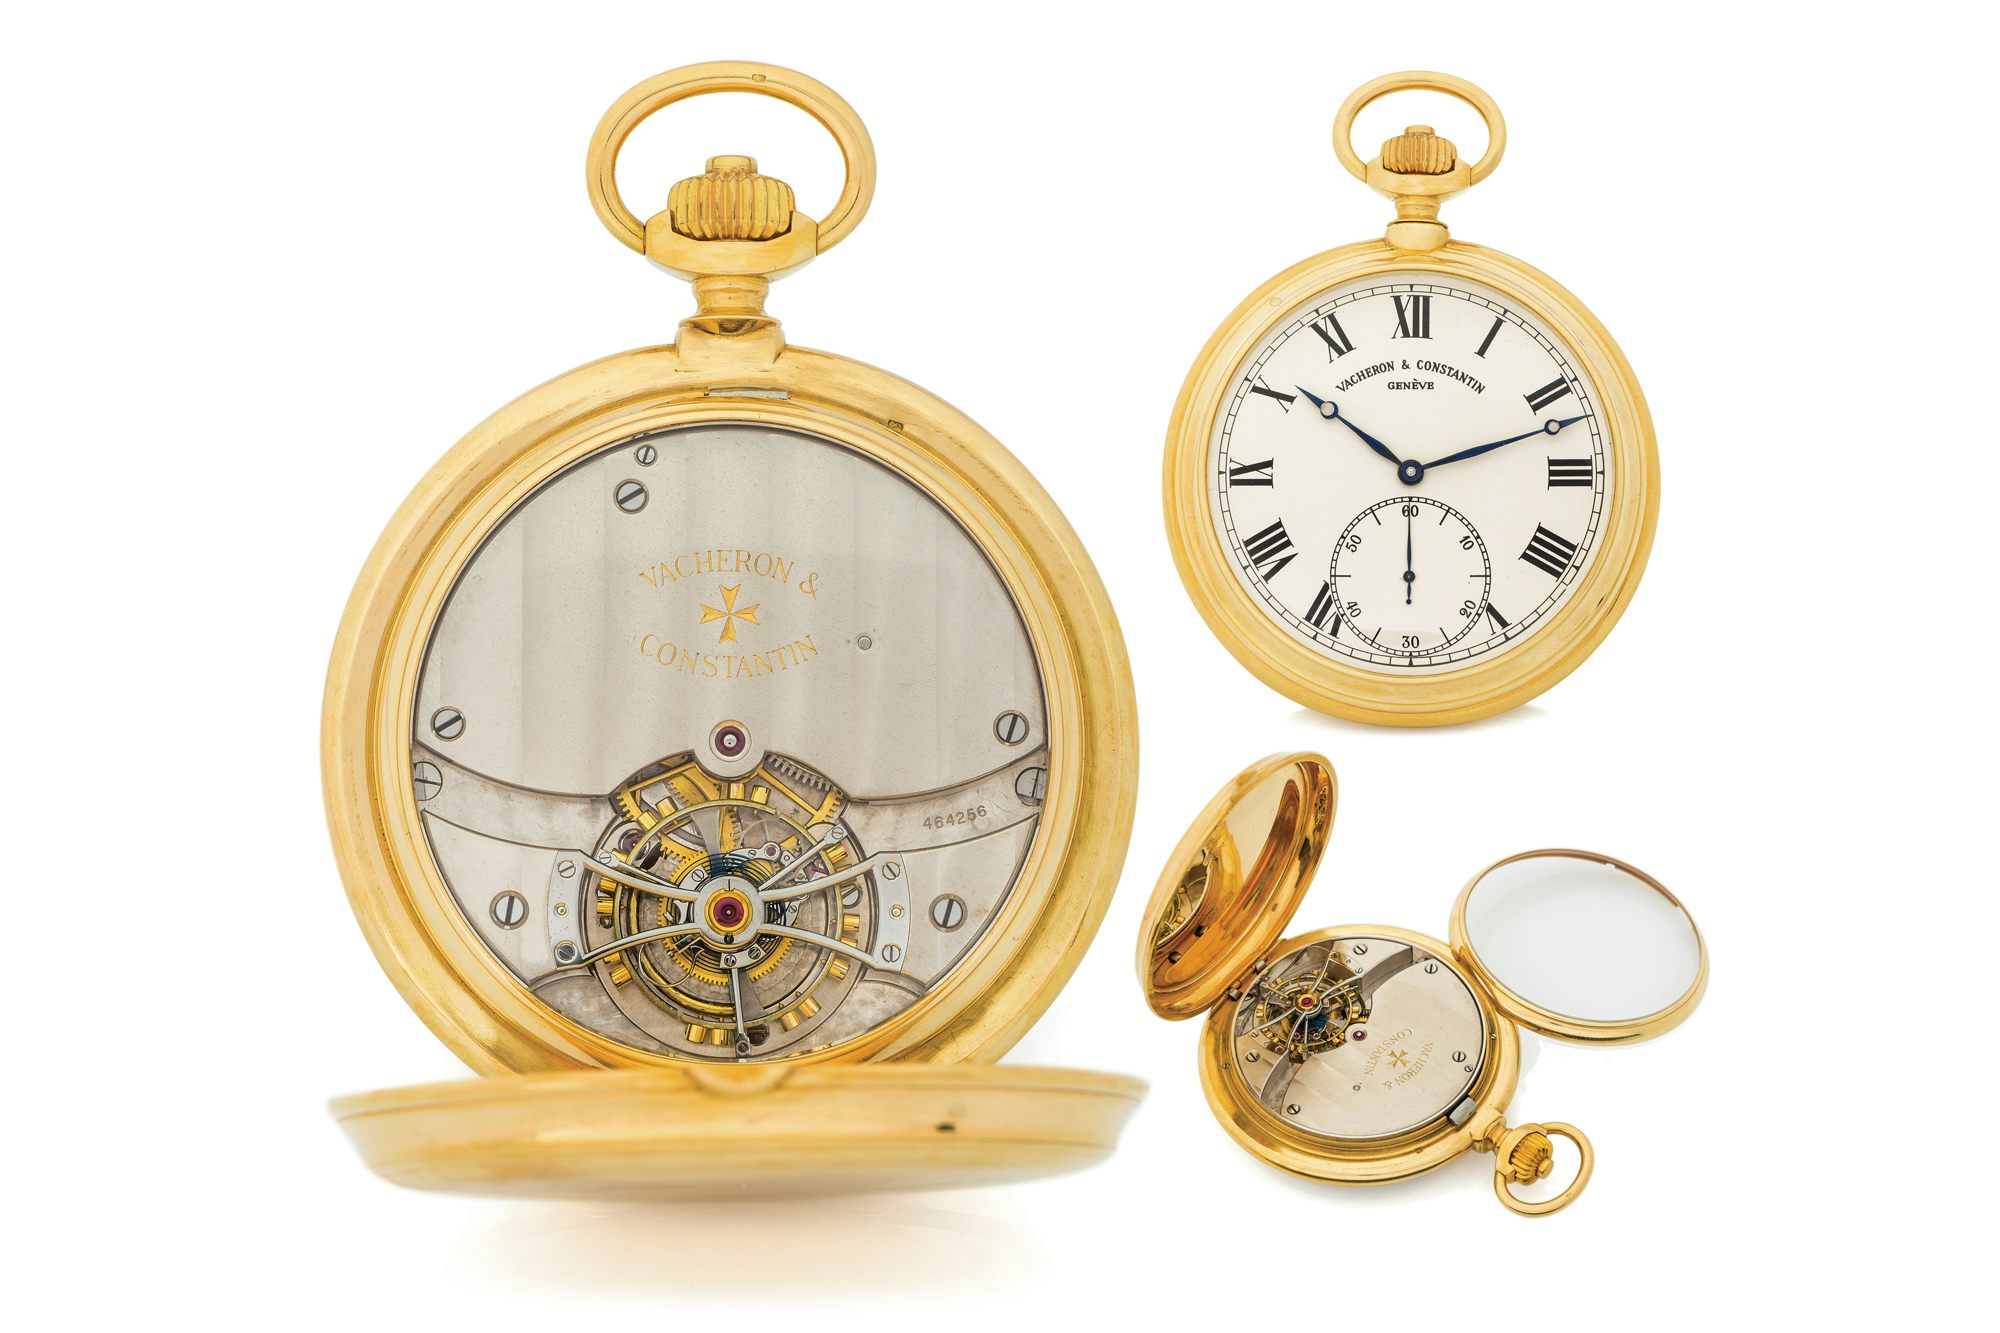 New Arrival Spinning Globe Gold Desk Clock Men Creative Gift For Pocket  Watch Copper Table Clock Mechanical Pocket Watch Male